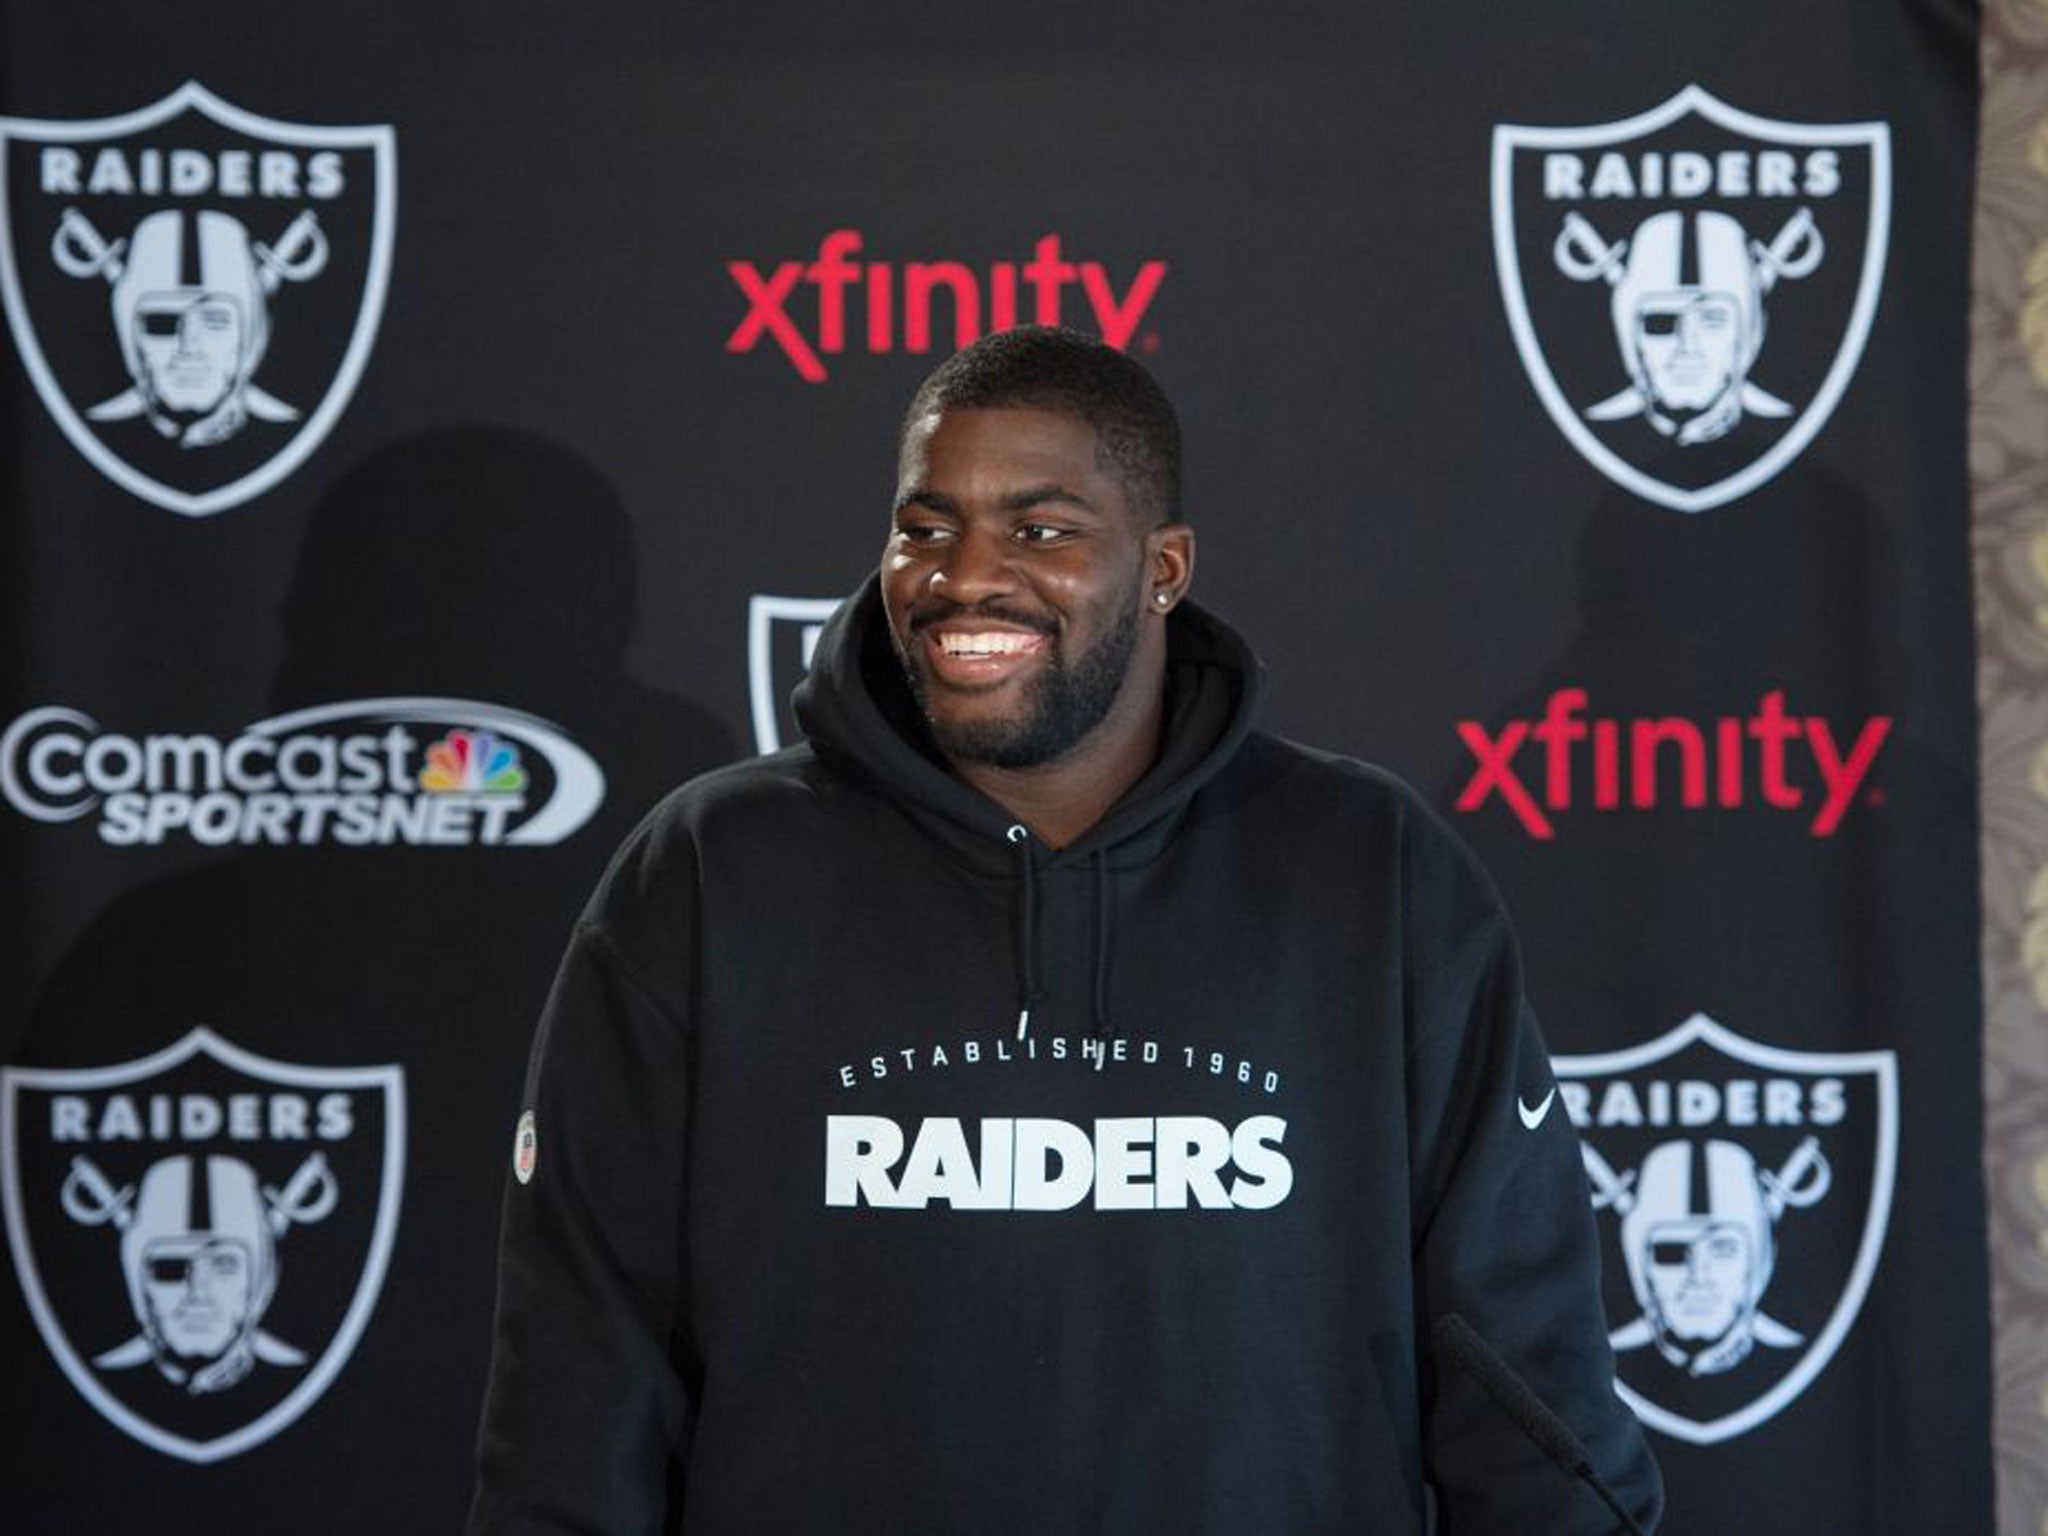 Born and raised in Manchester, Menelik Watson will be the first Brit to play in the International Series at Wembley